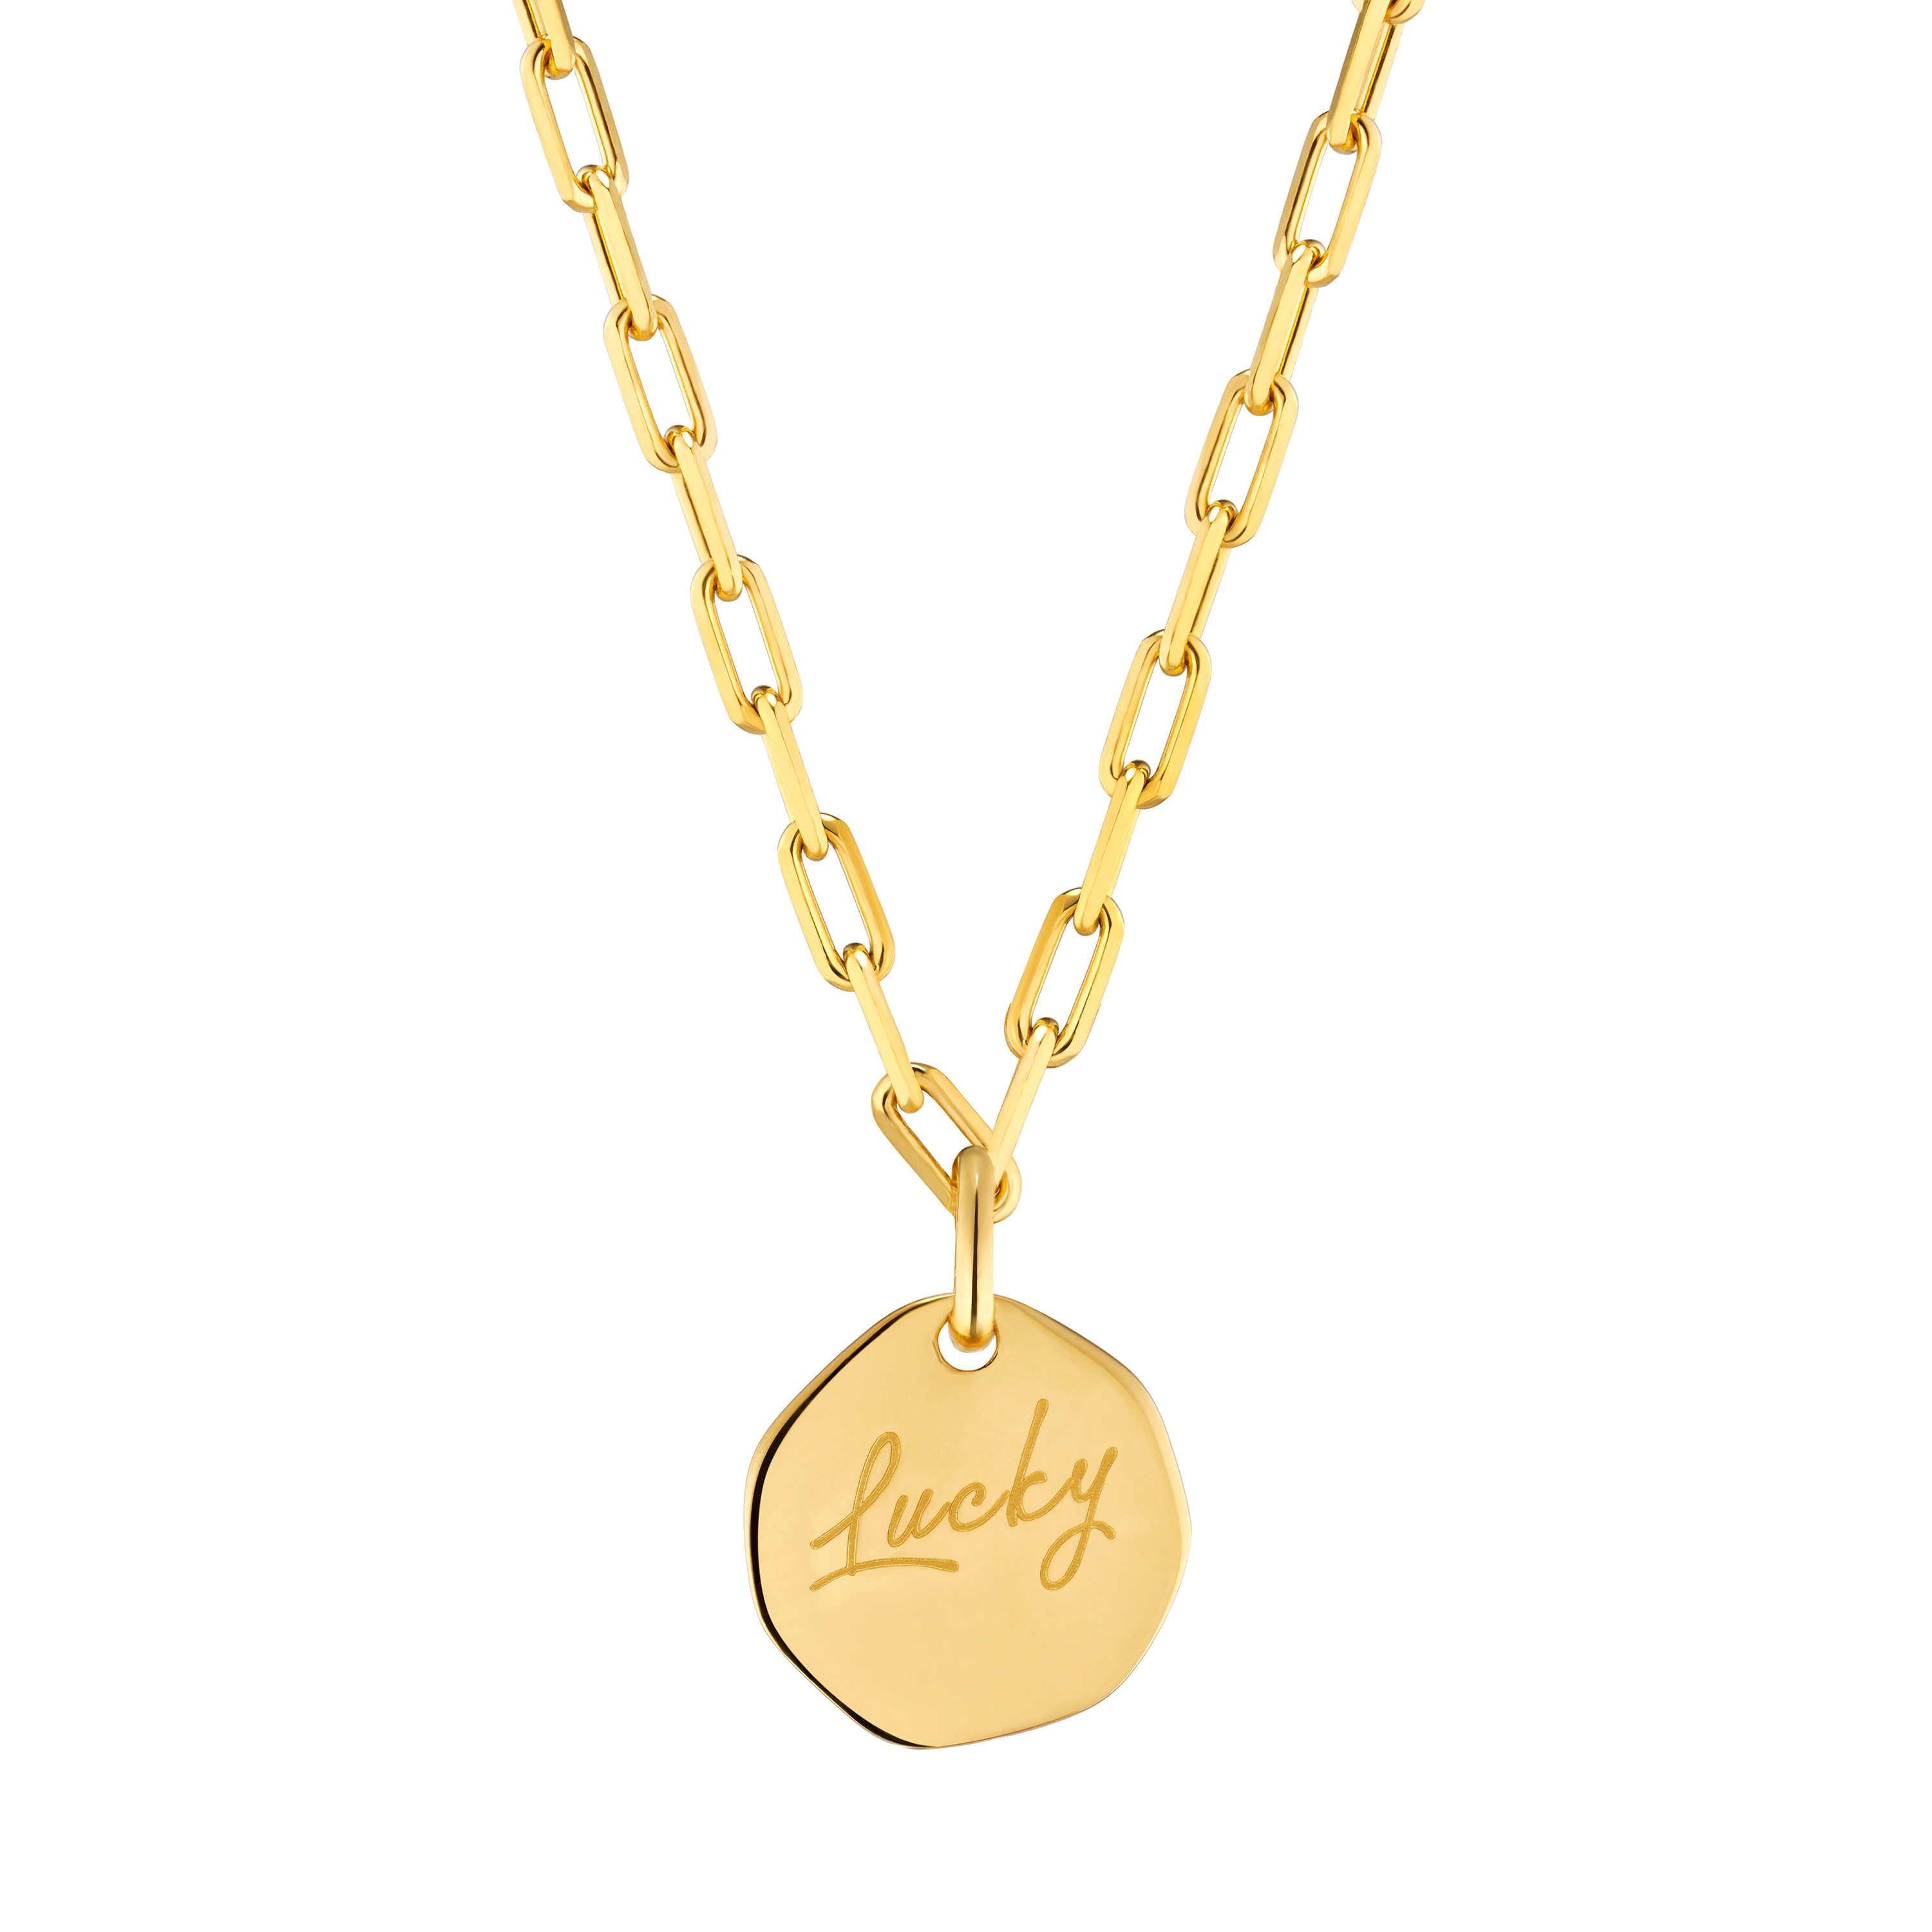 "Lucky" Gold Necklace